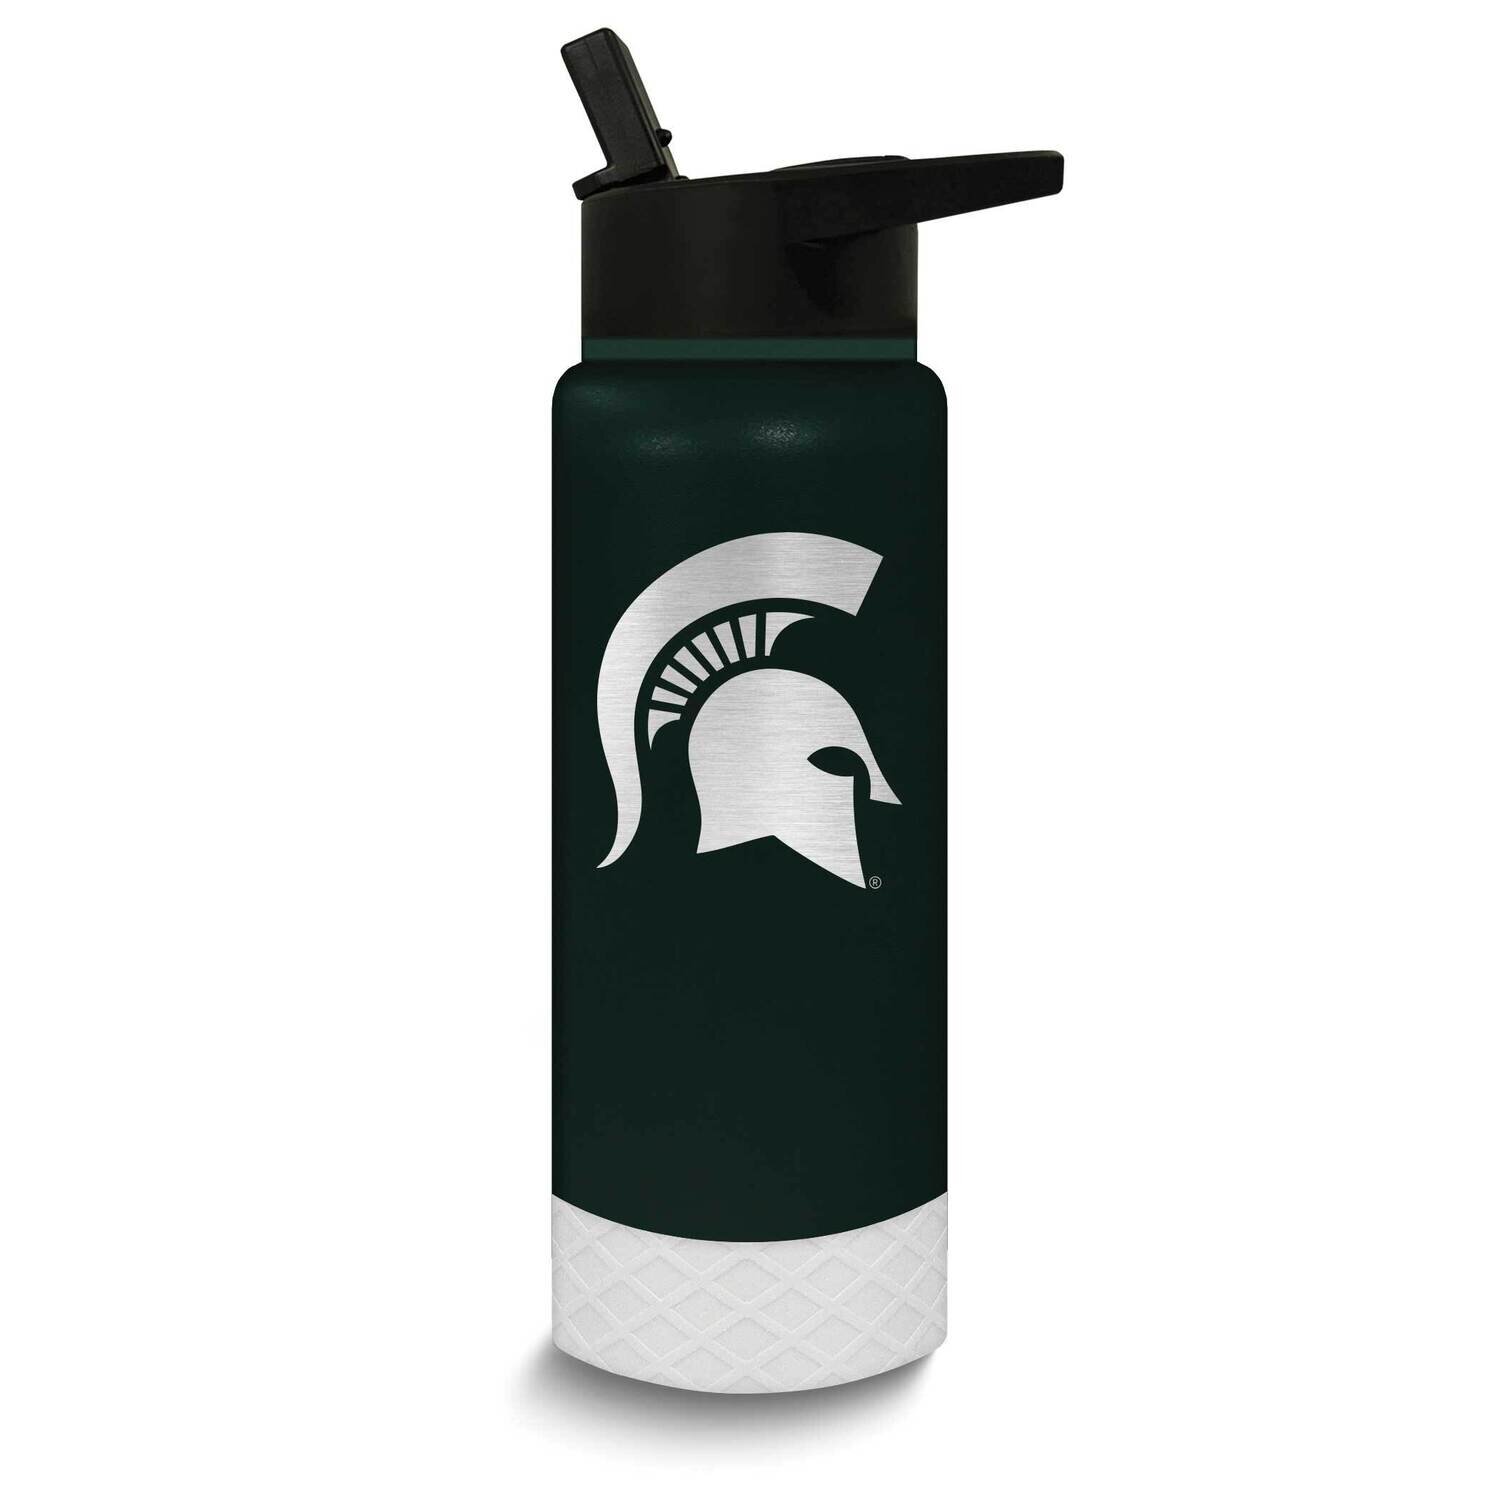 Collegiate Michigan State Univeristy Stainless JR Water Bottle GM26111-MIS